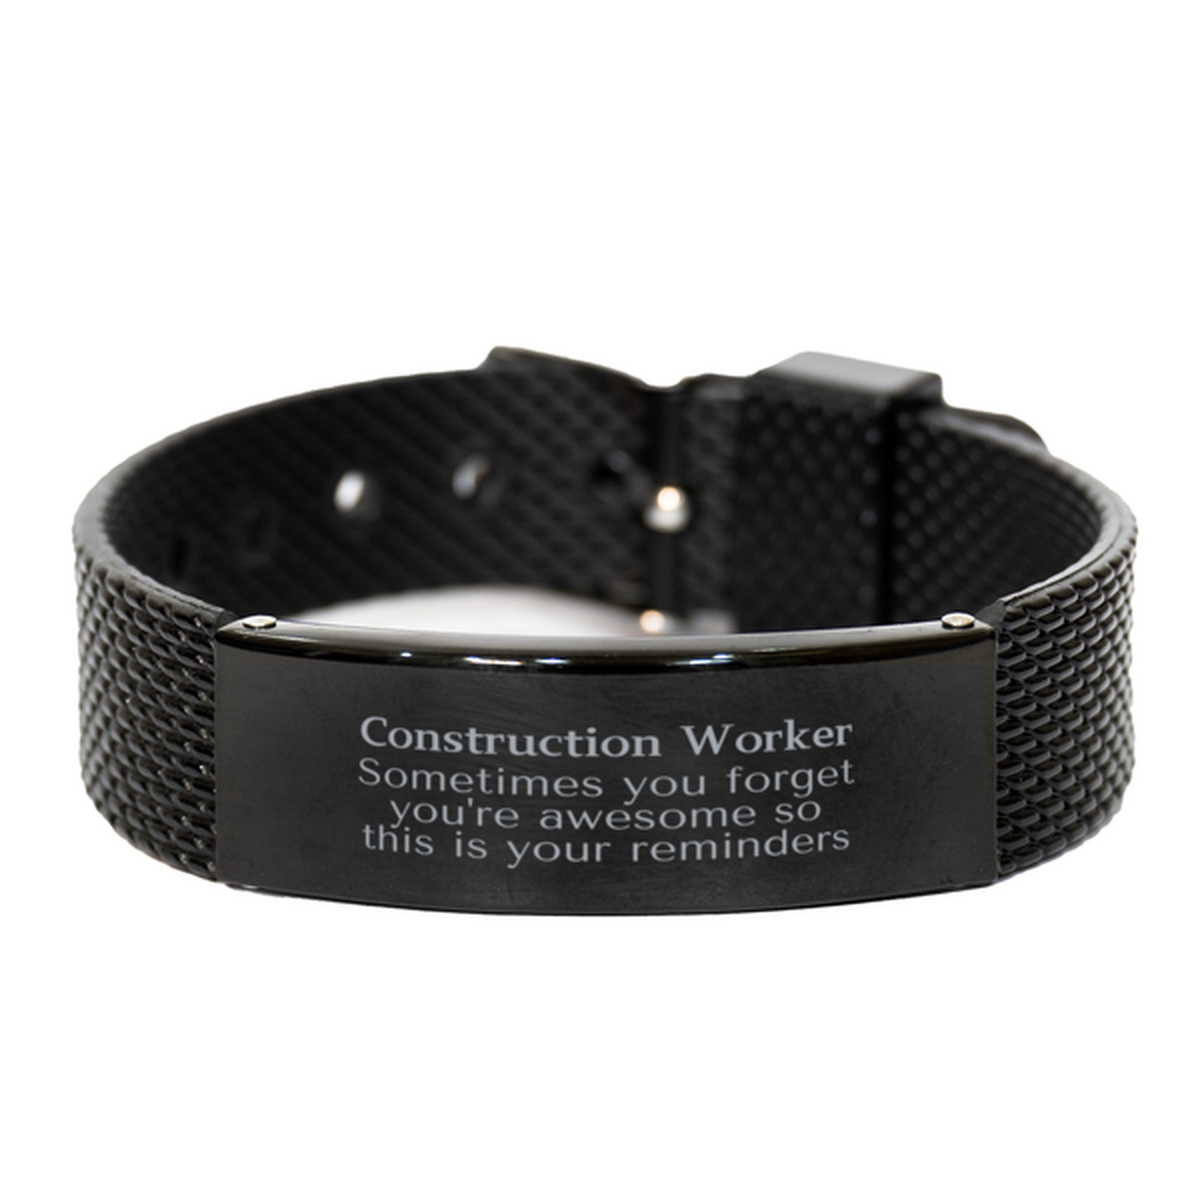 Sentimental Construction Worker Black Shark Mesh Bracelet, Construction Worker Sometimes you forget you're awesome so this is your reminders, Graduation Christmas Birthday Gifts for Construction Worker, Men, Women, Coworkers